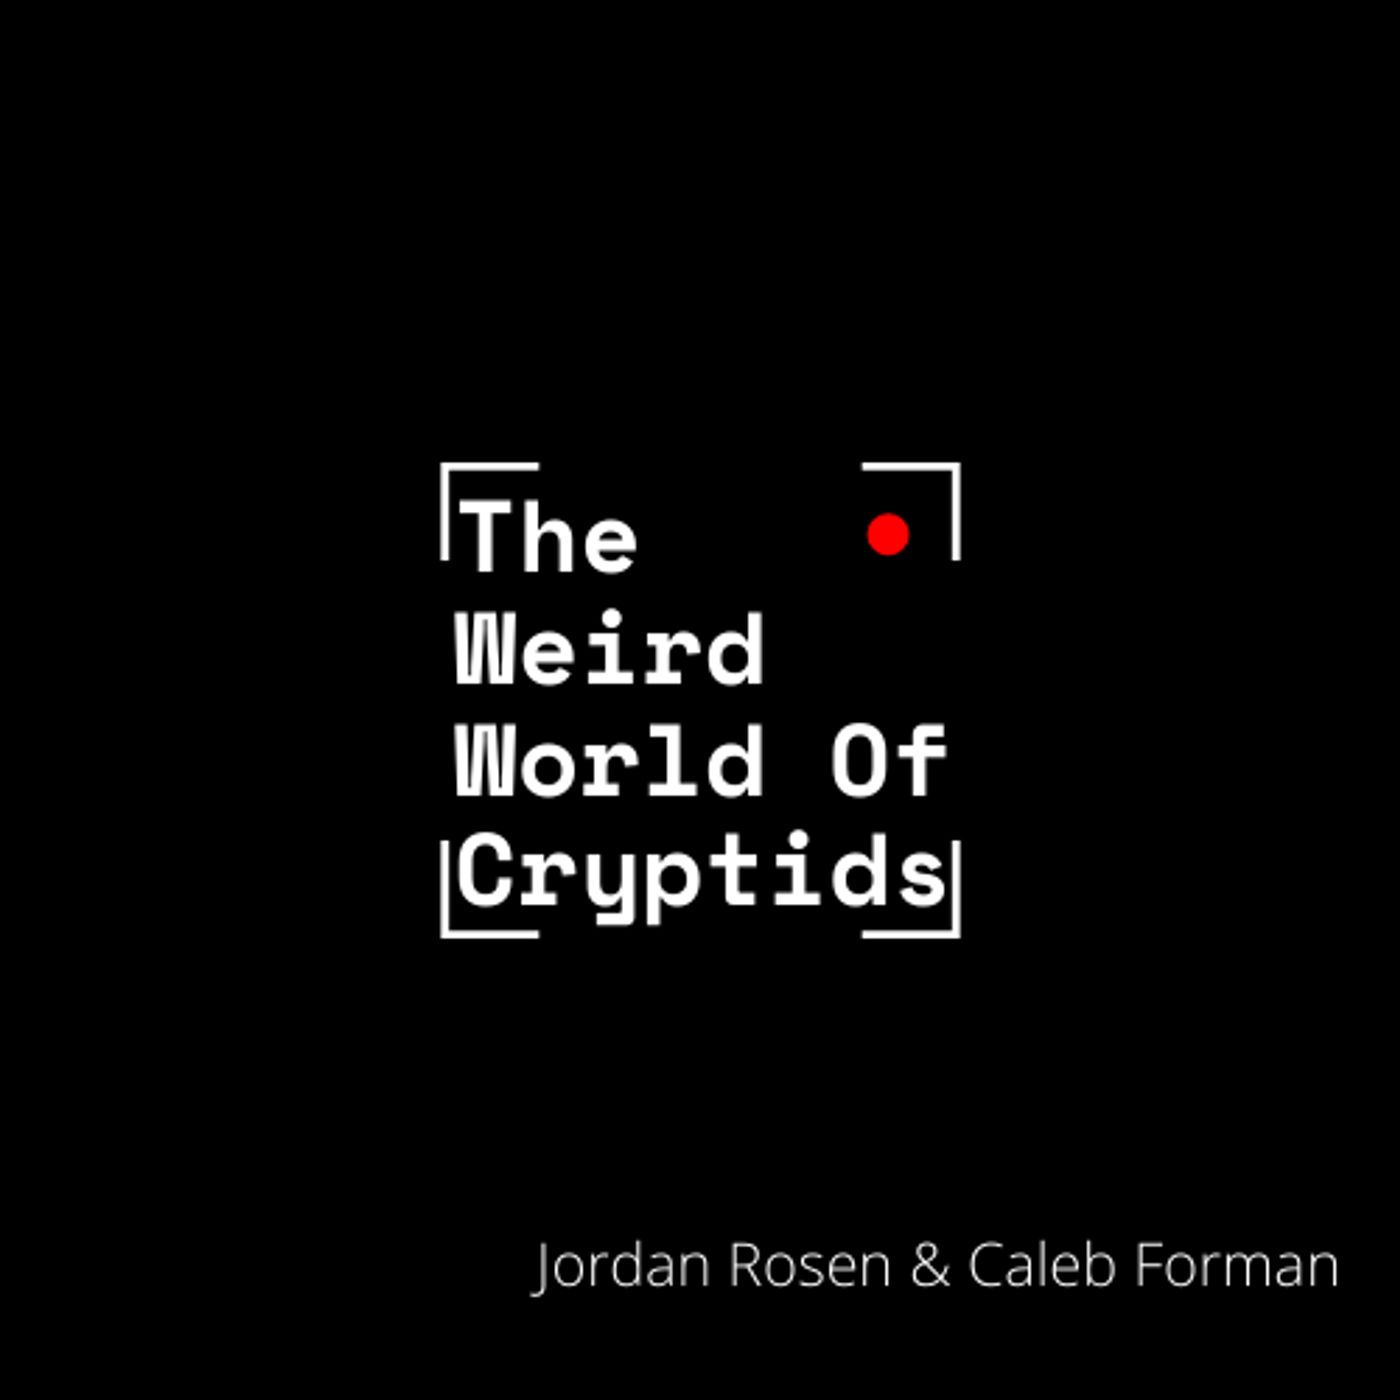 The Weird World of Cryptids